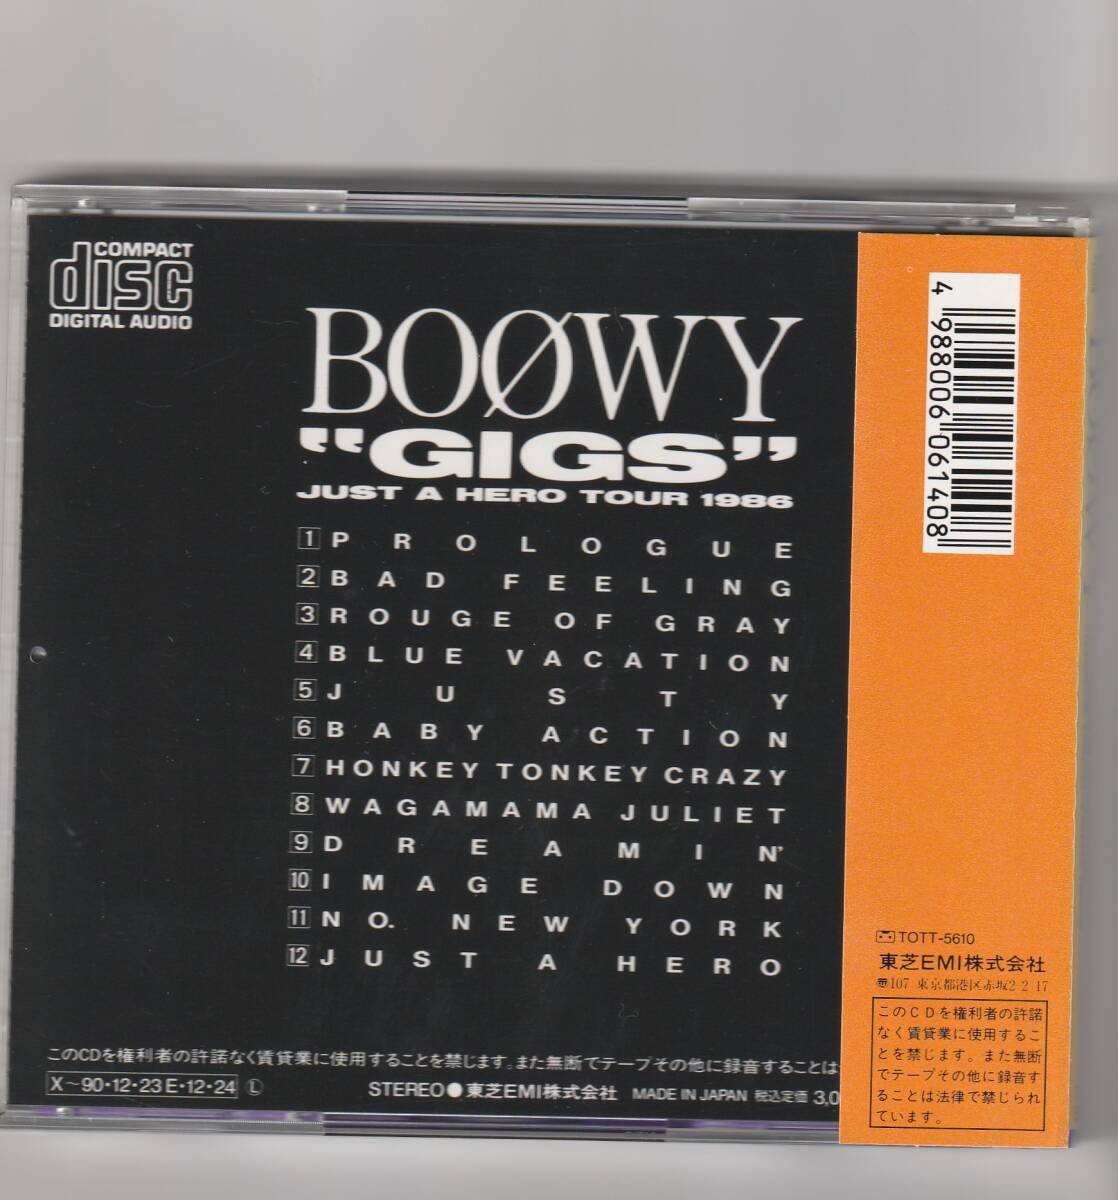  BOOWY / “GIGS” JUST A HERO TOUR 1986　TOCT-5610_画像2